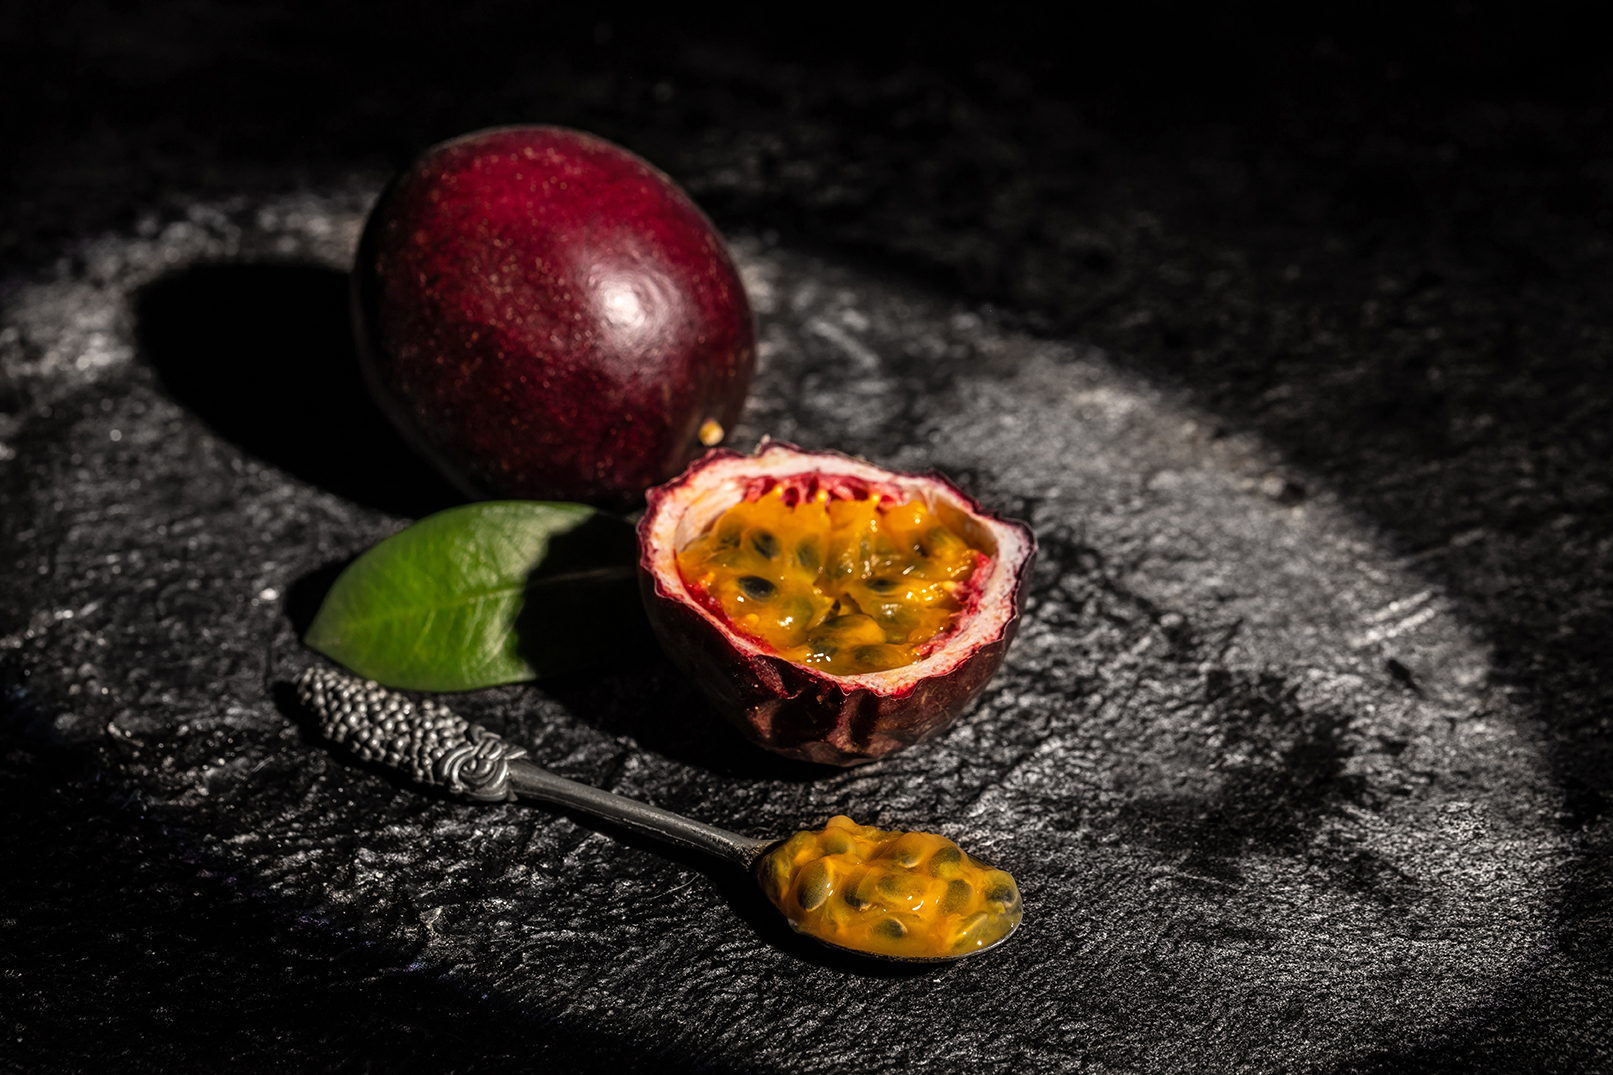 Sliced & whole passion fruit next to a spoon containing some of the fruit